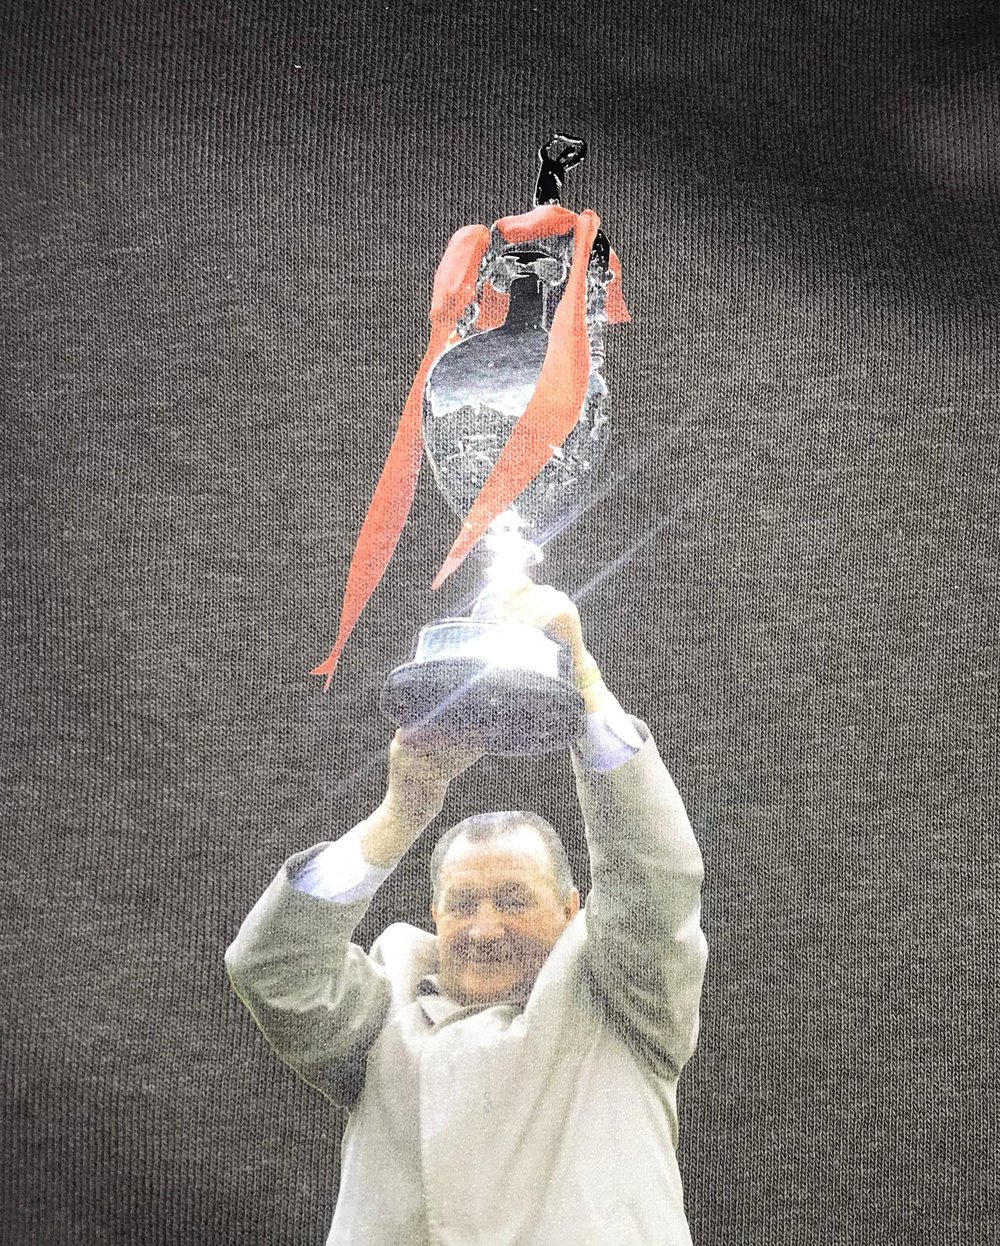 Bob Paisley - One year we came second